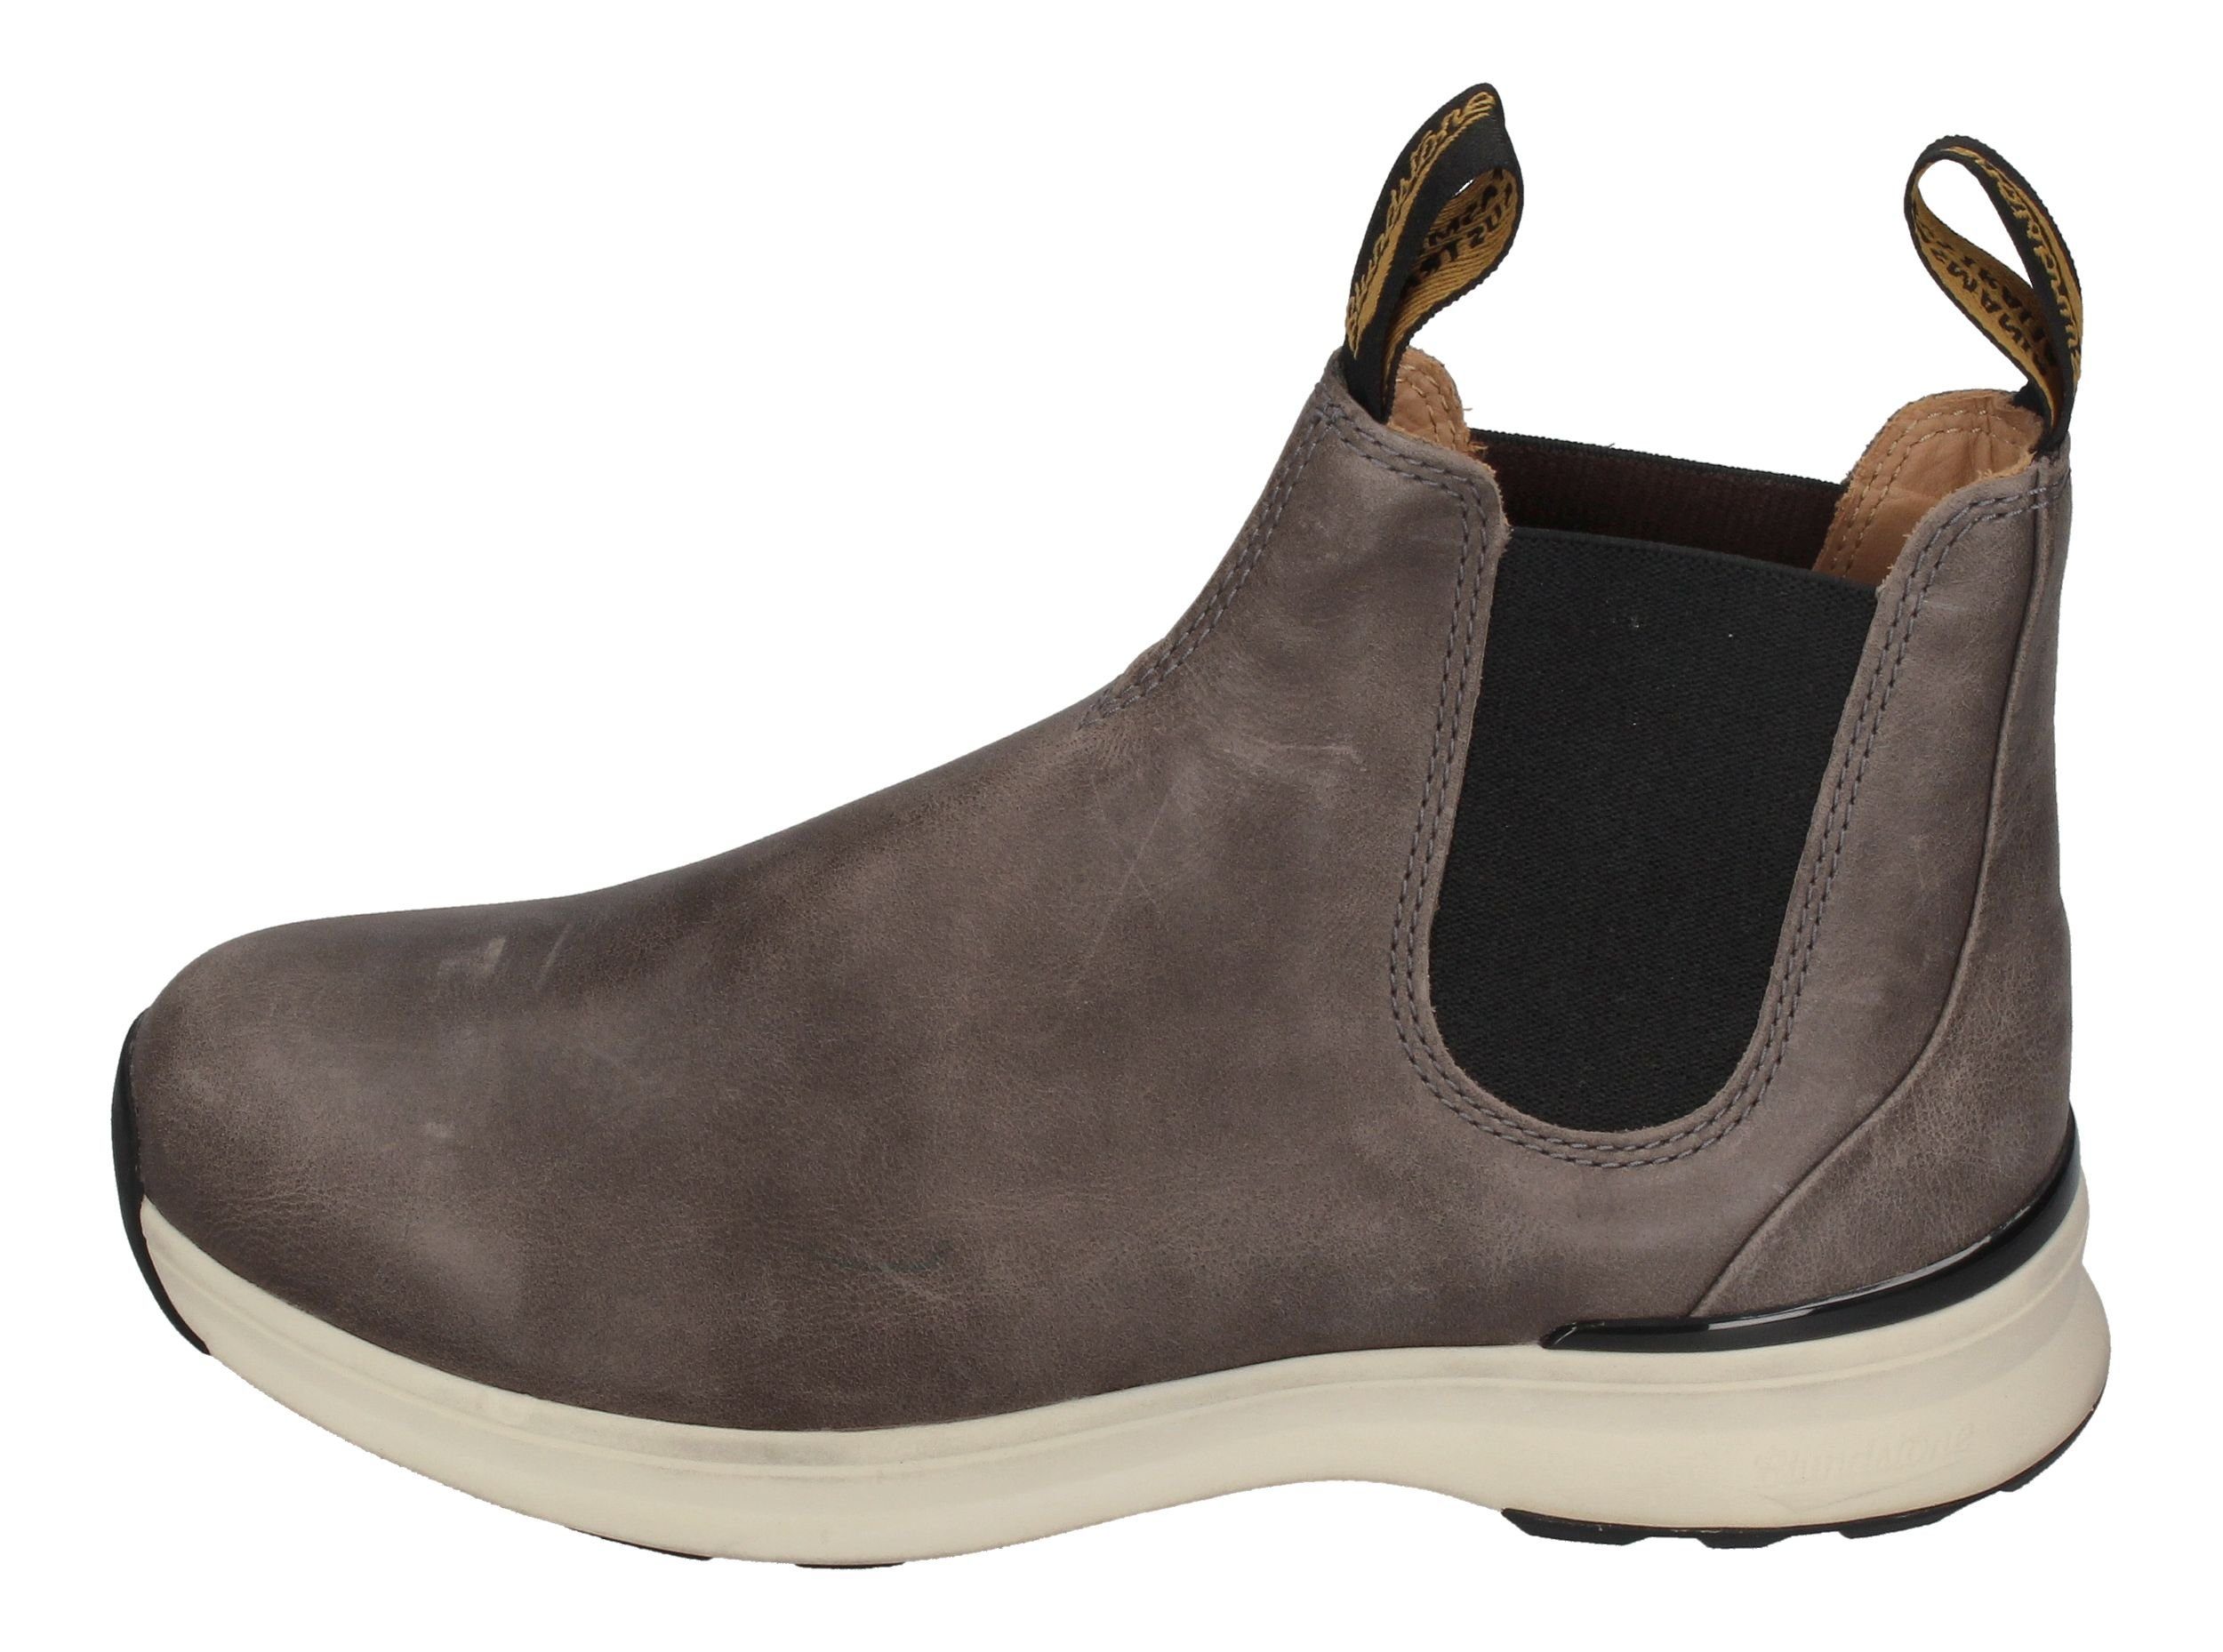 Series Sided Blundstone 2141 Active Dusty Elastic Grey Chelseaboots